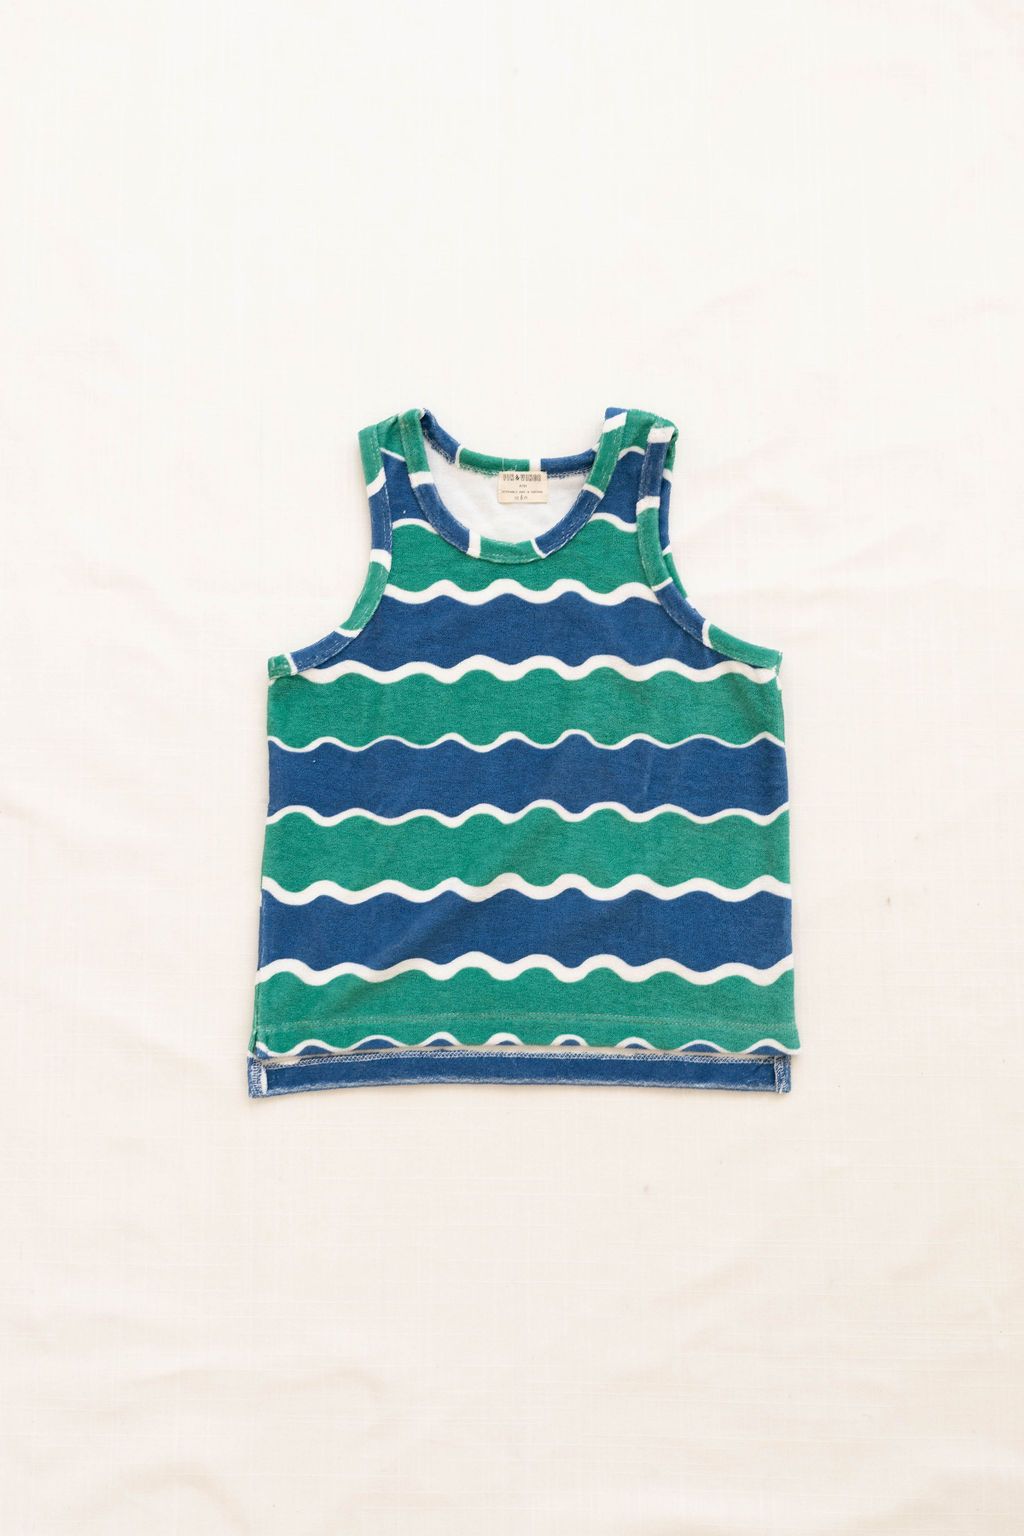 Fin & Vince Terry Tank Top, Waves